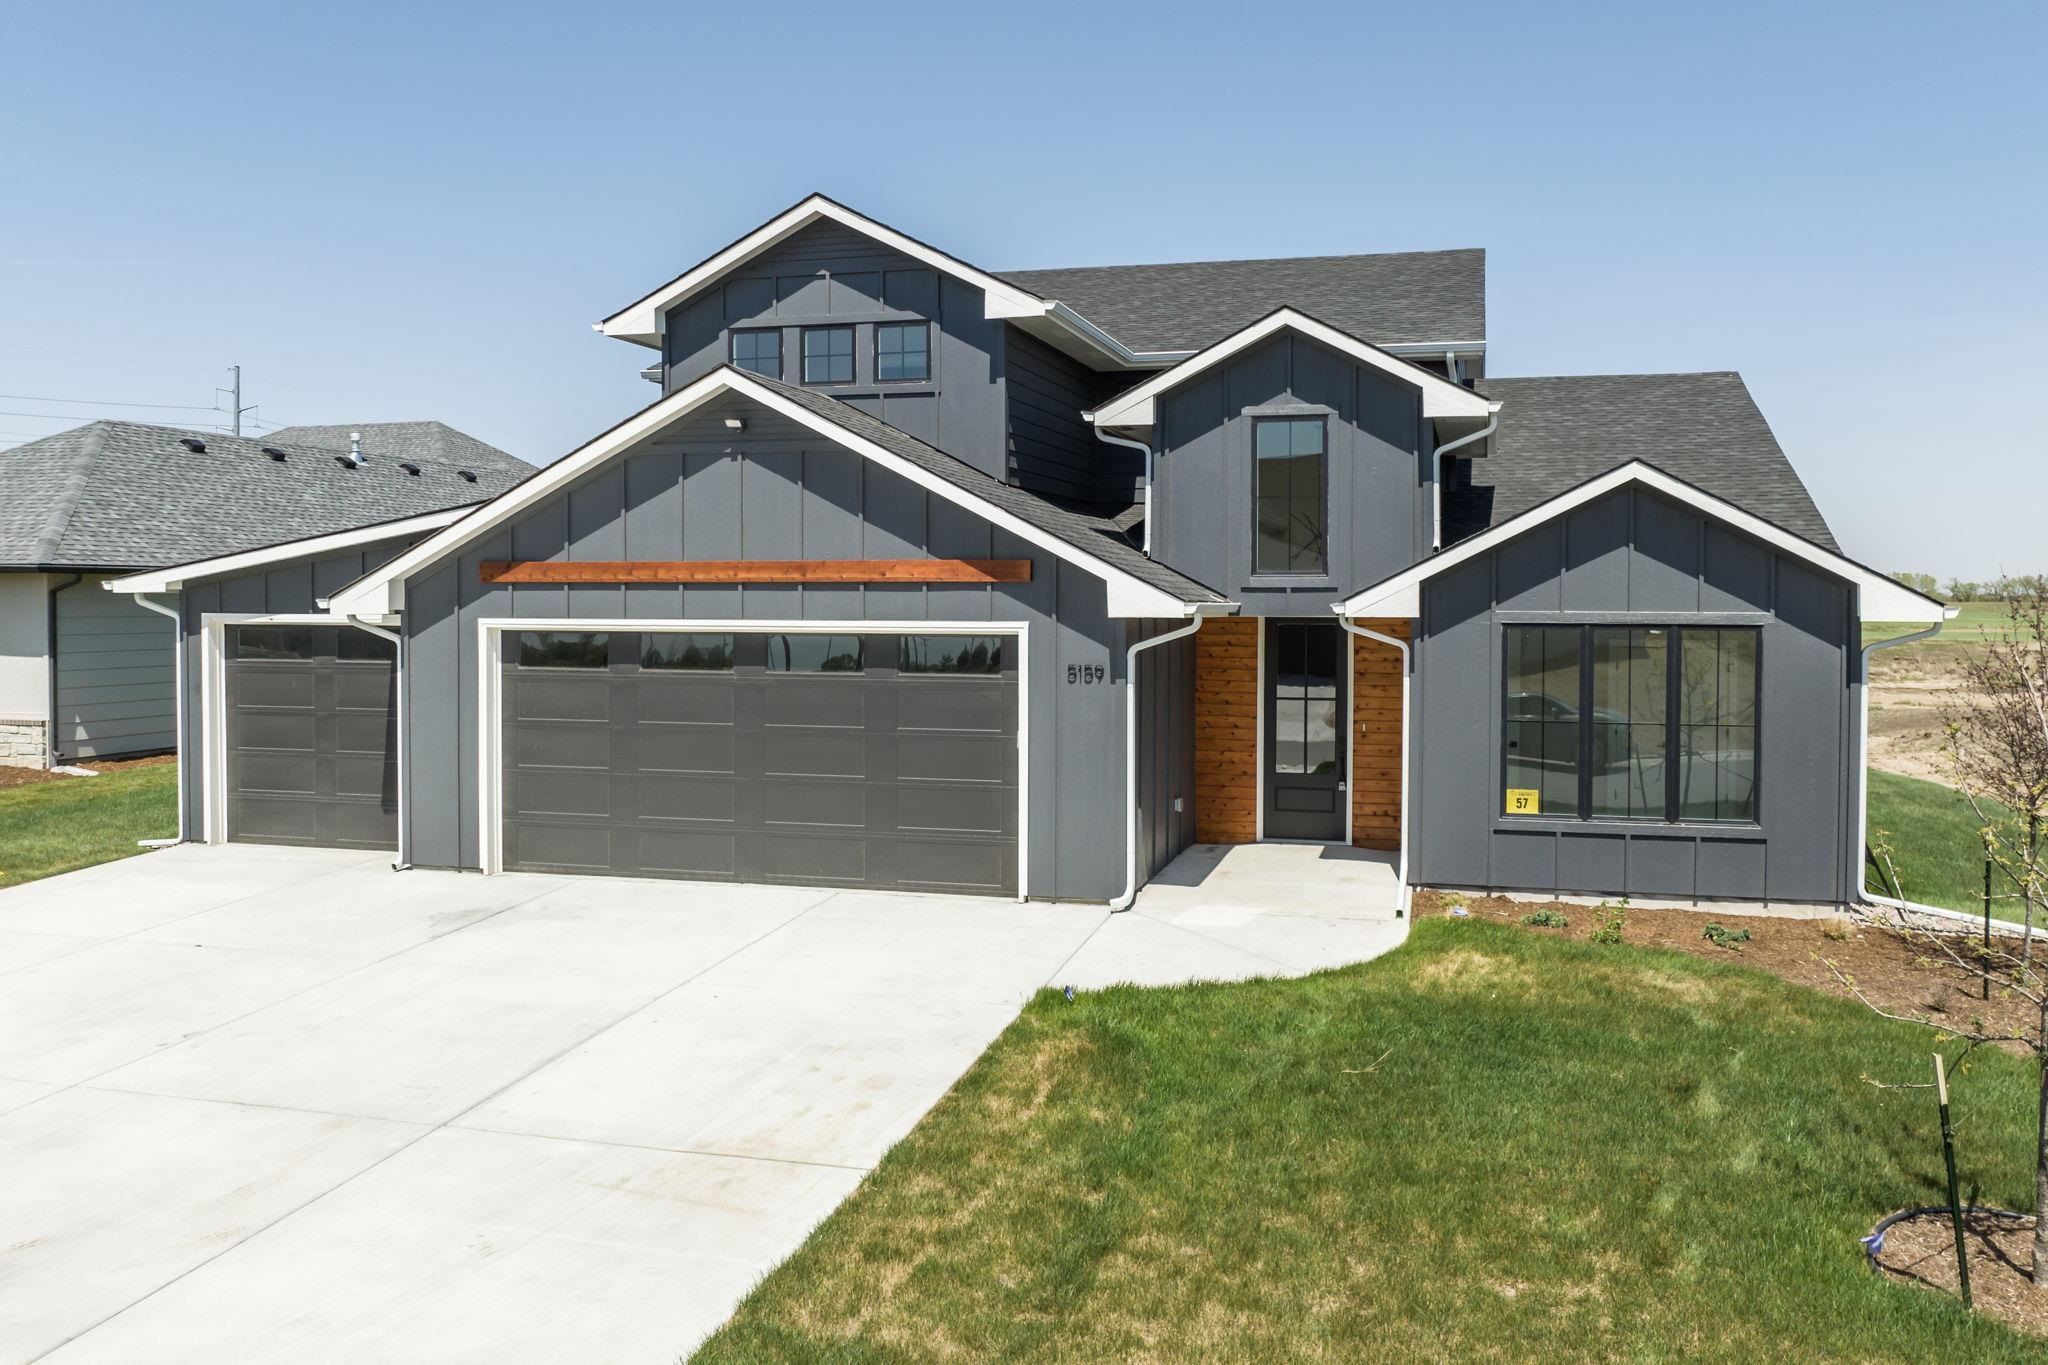 Artistic Builders brings a fabulous 2 Story Patio Home to The Coves. Beautiful Black windows and Modern design.